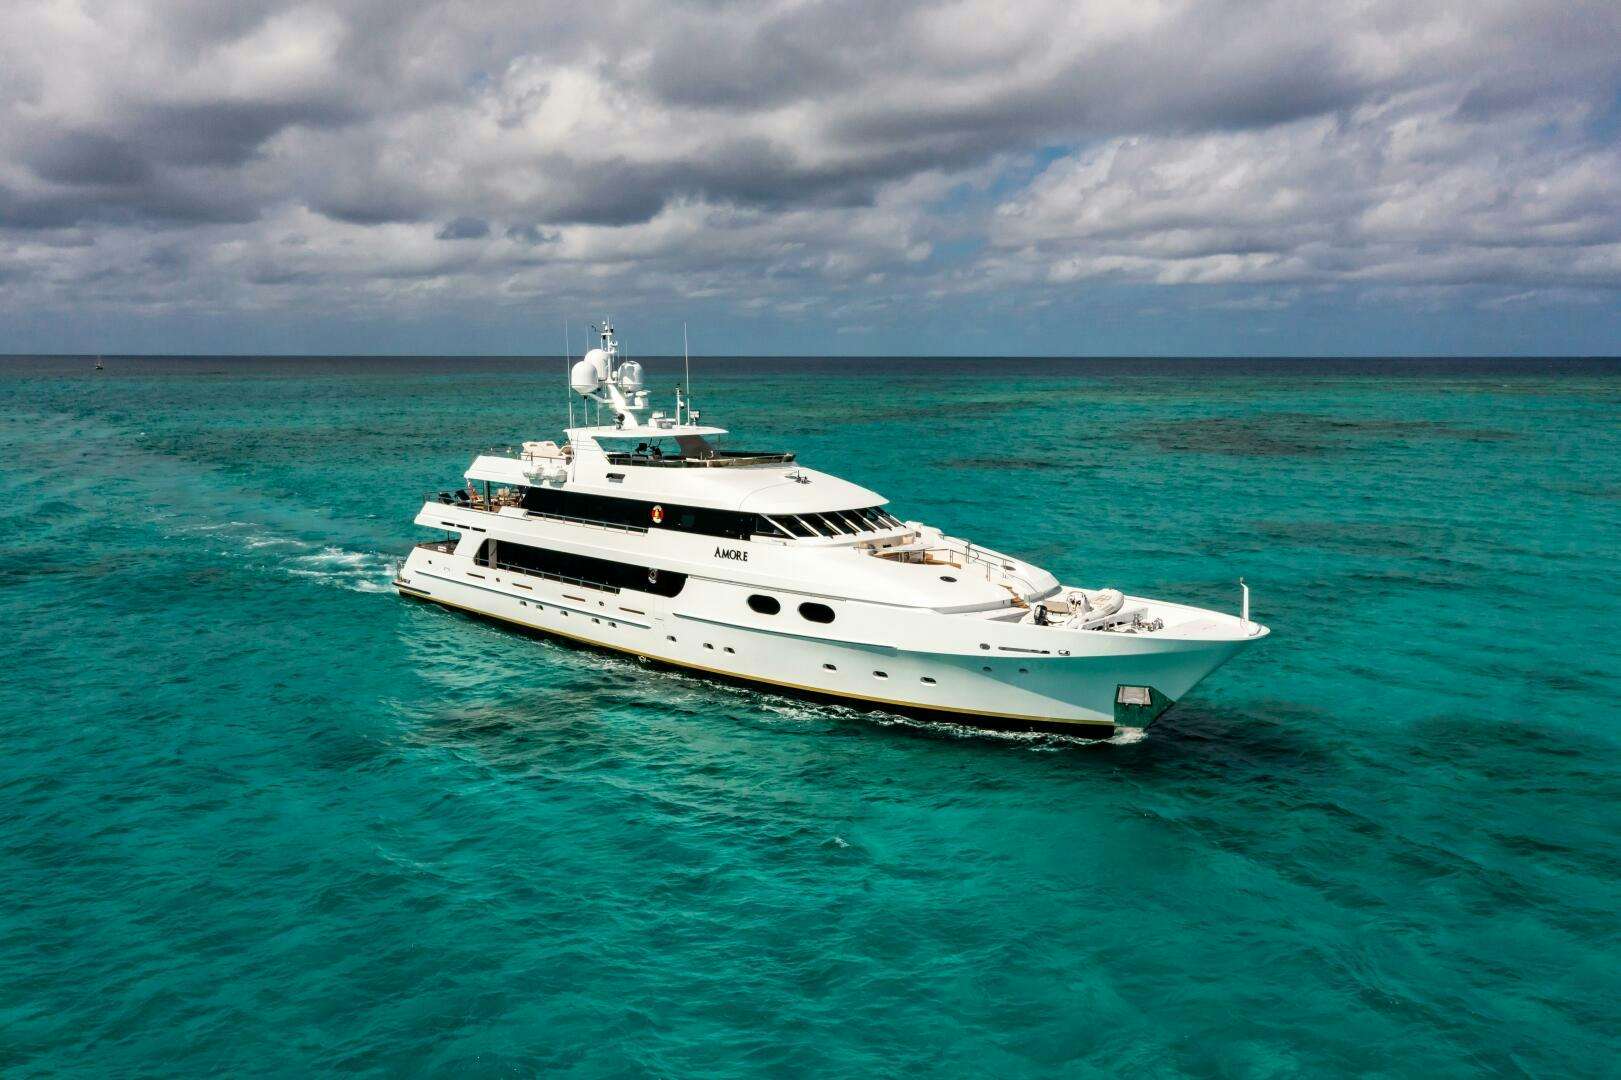 AMORE Yacht for Sale in West Palm Beach, 157' (47.85m) 2005 Christensen